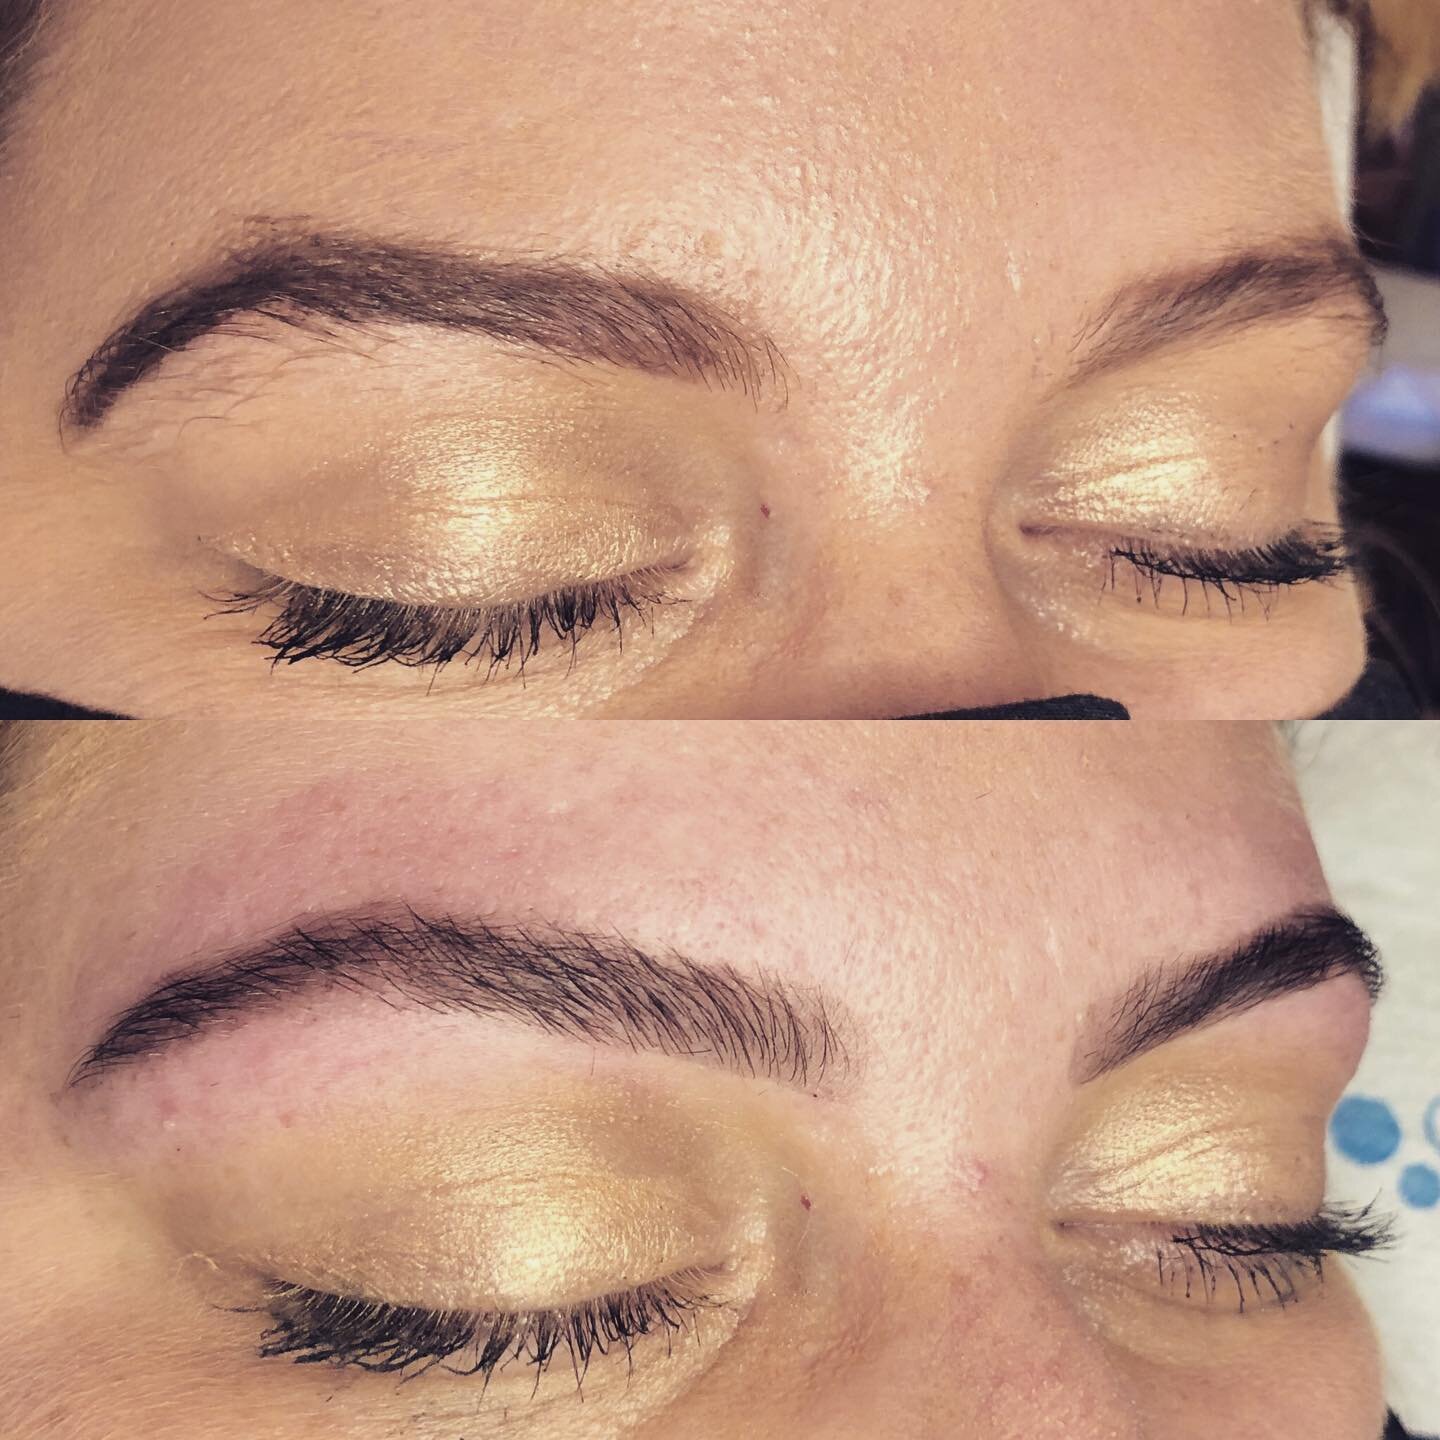 Brown thread and tint before and after. Top photo is how my client has her brows with her make up, second photo is after a quick thread and tint. Those after lockdown threading sessions! Aloe at the ready 😭
.
.
.

To Get Lashed:

via my Instagram &l